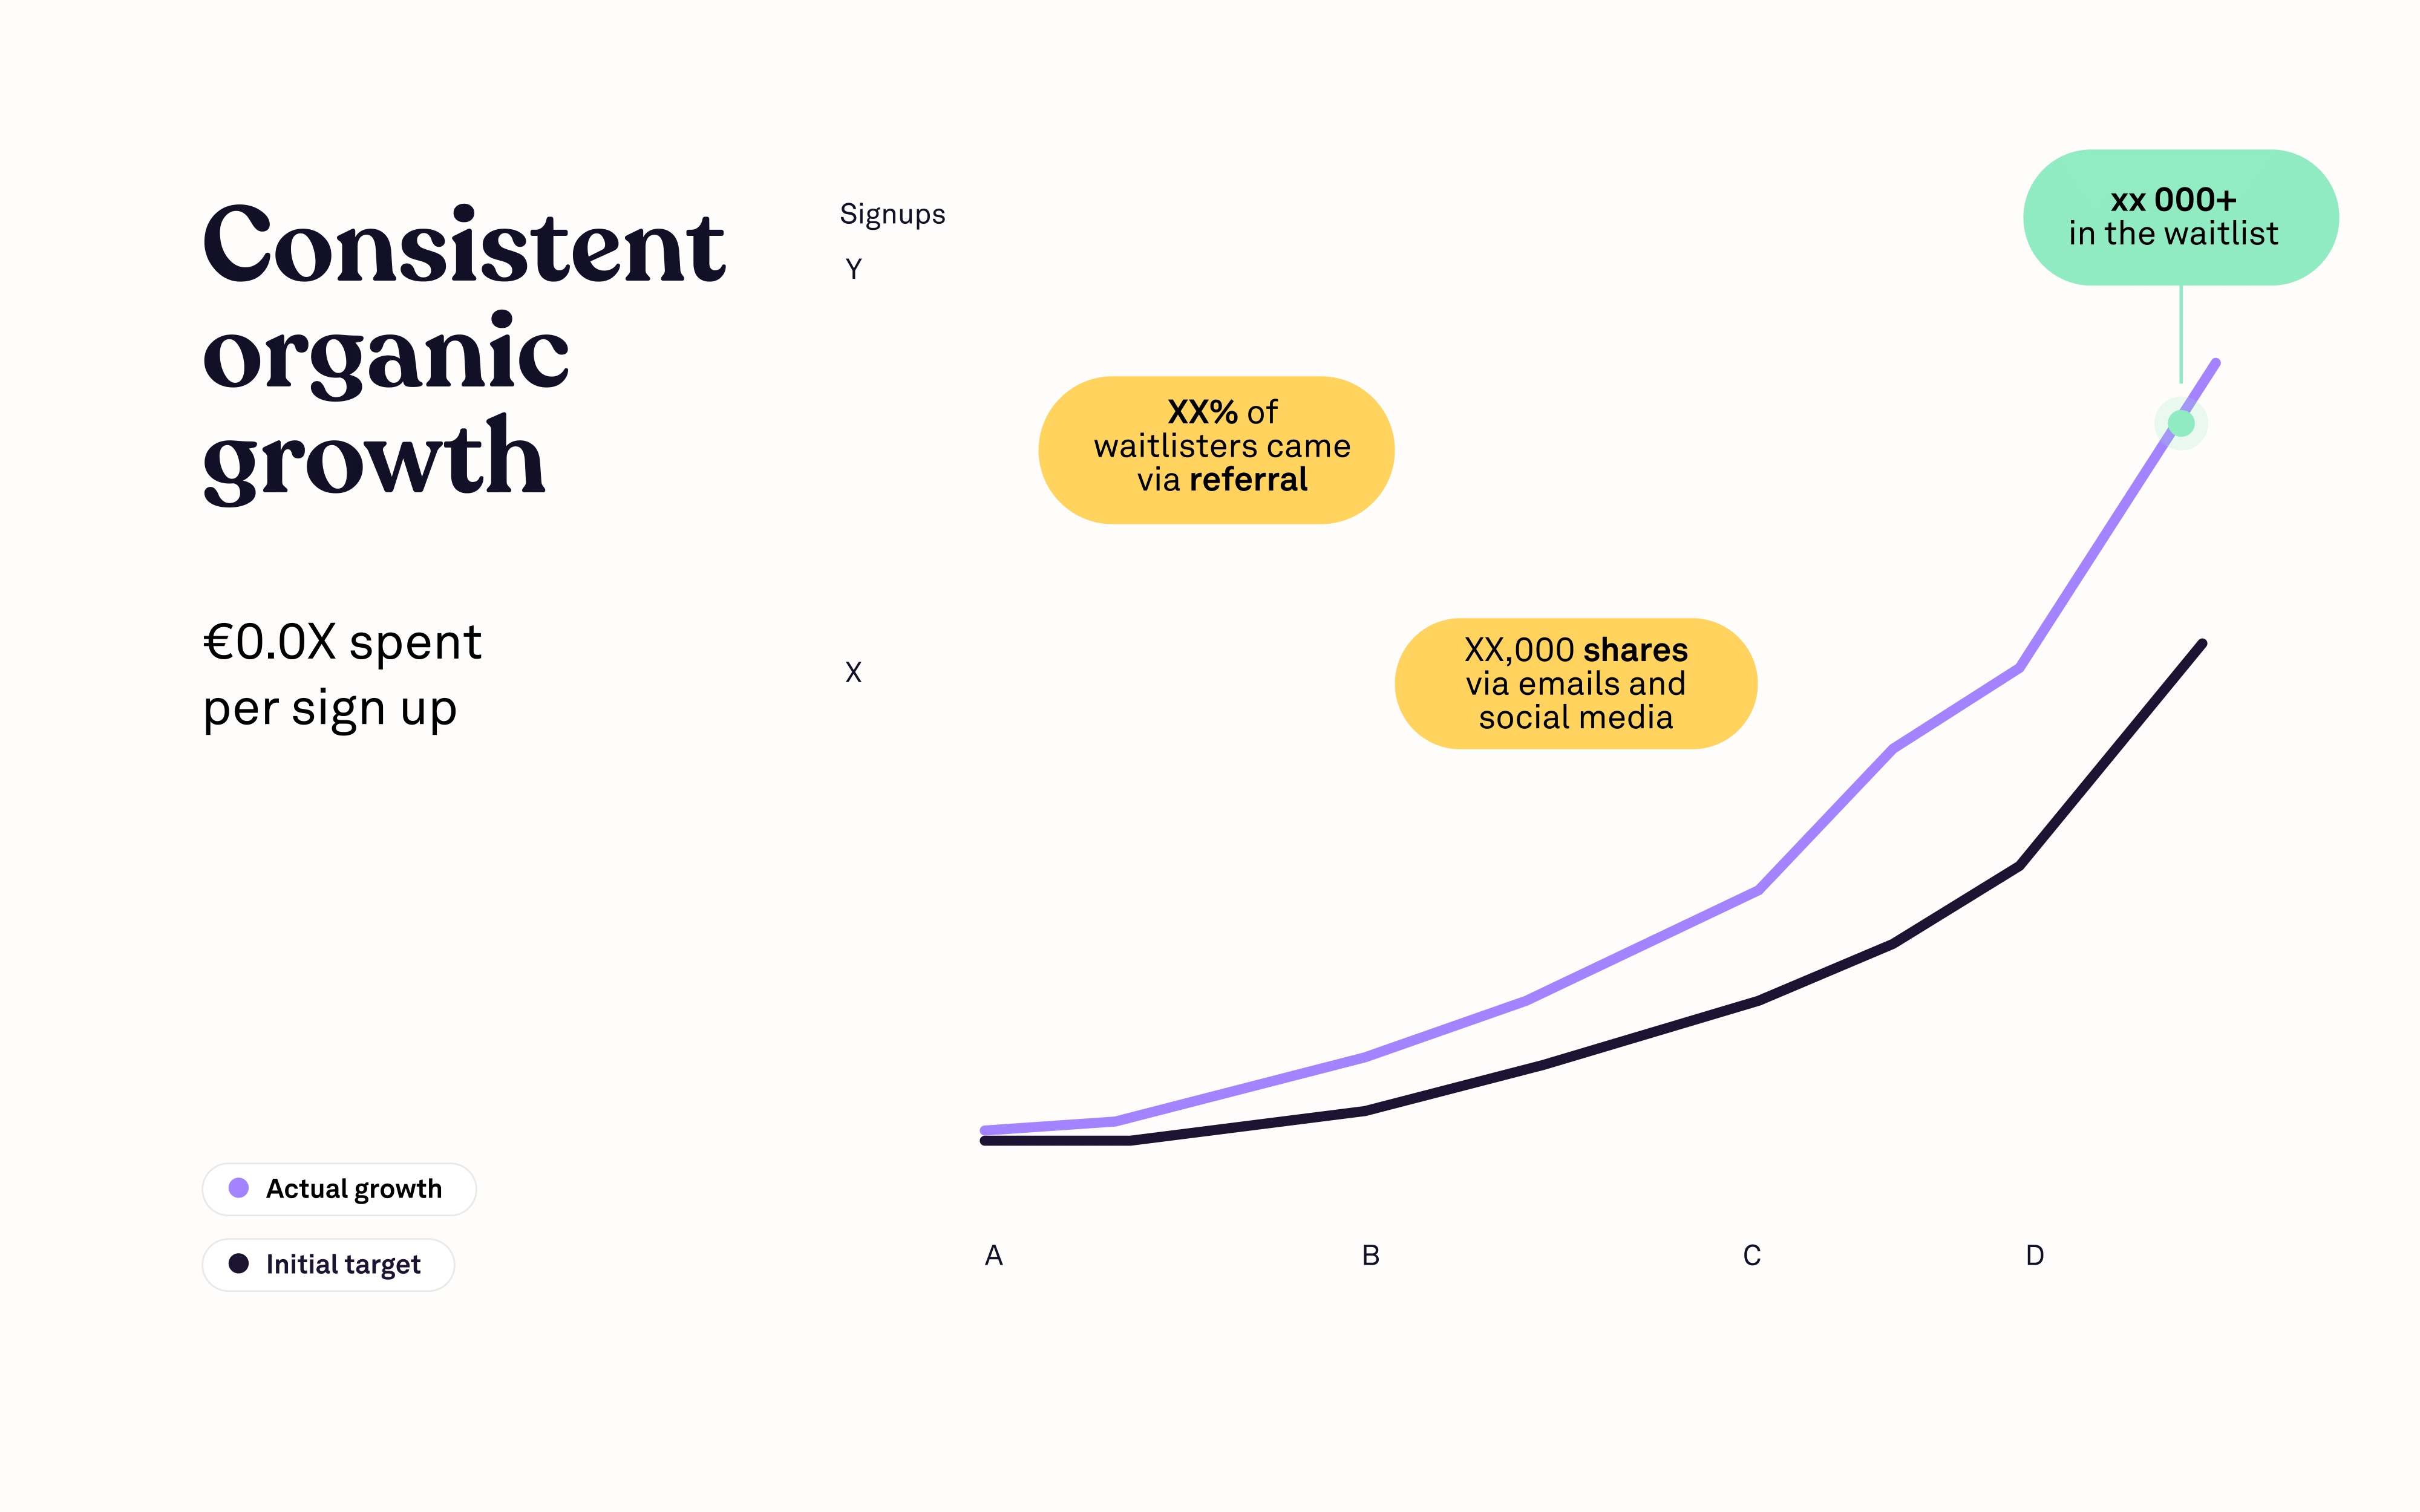 Line graph showing consistent organic growth